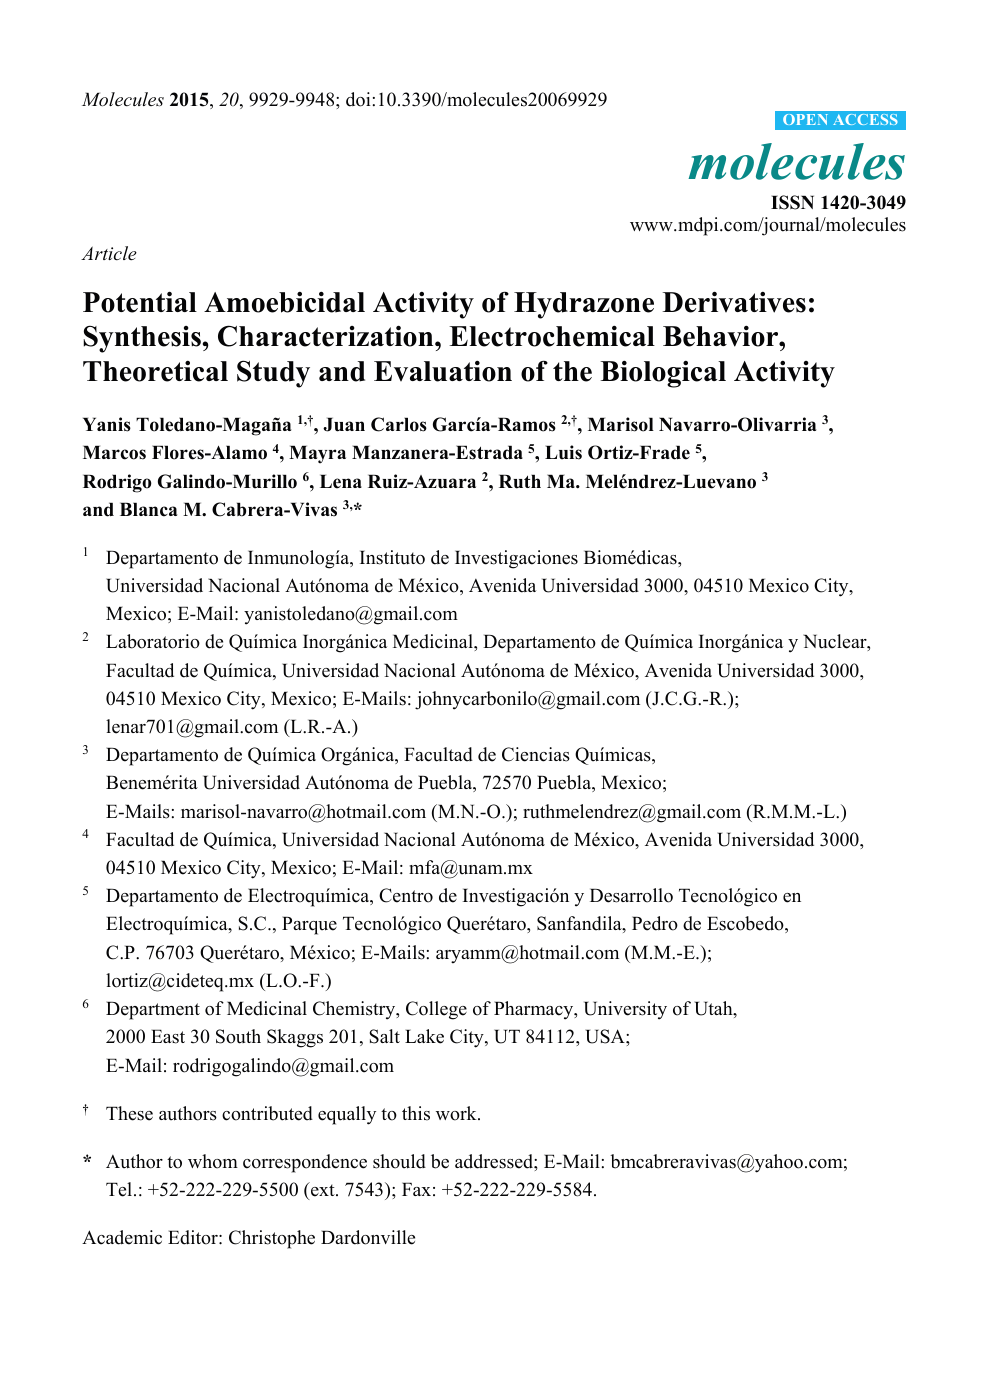 Potential Amoebicidal Activity of Hydrazone Derivatives: Synthesis,  Characterization, Electrochemical Behavior, Theoretical Study and  Evaluation of the Biological Activity – topic of research paper in Chemical  sciences. Download scholarly article PDF ...